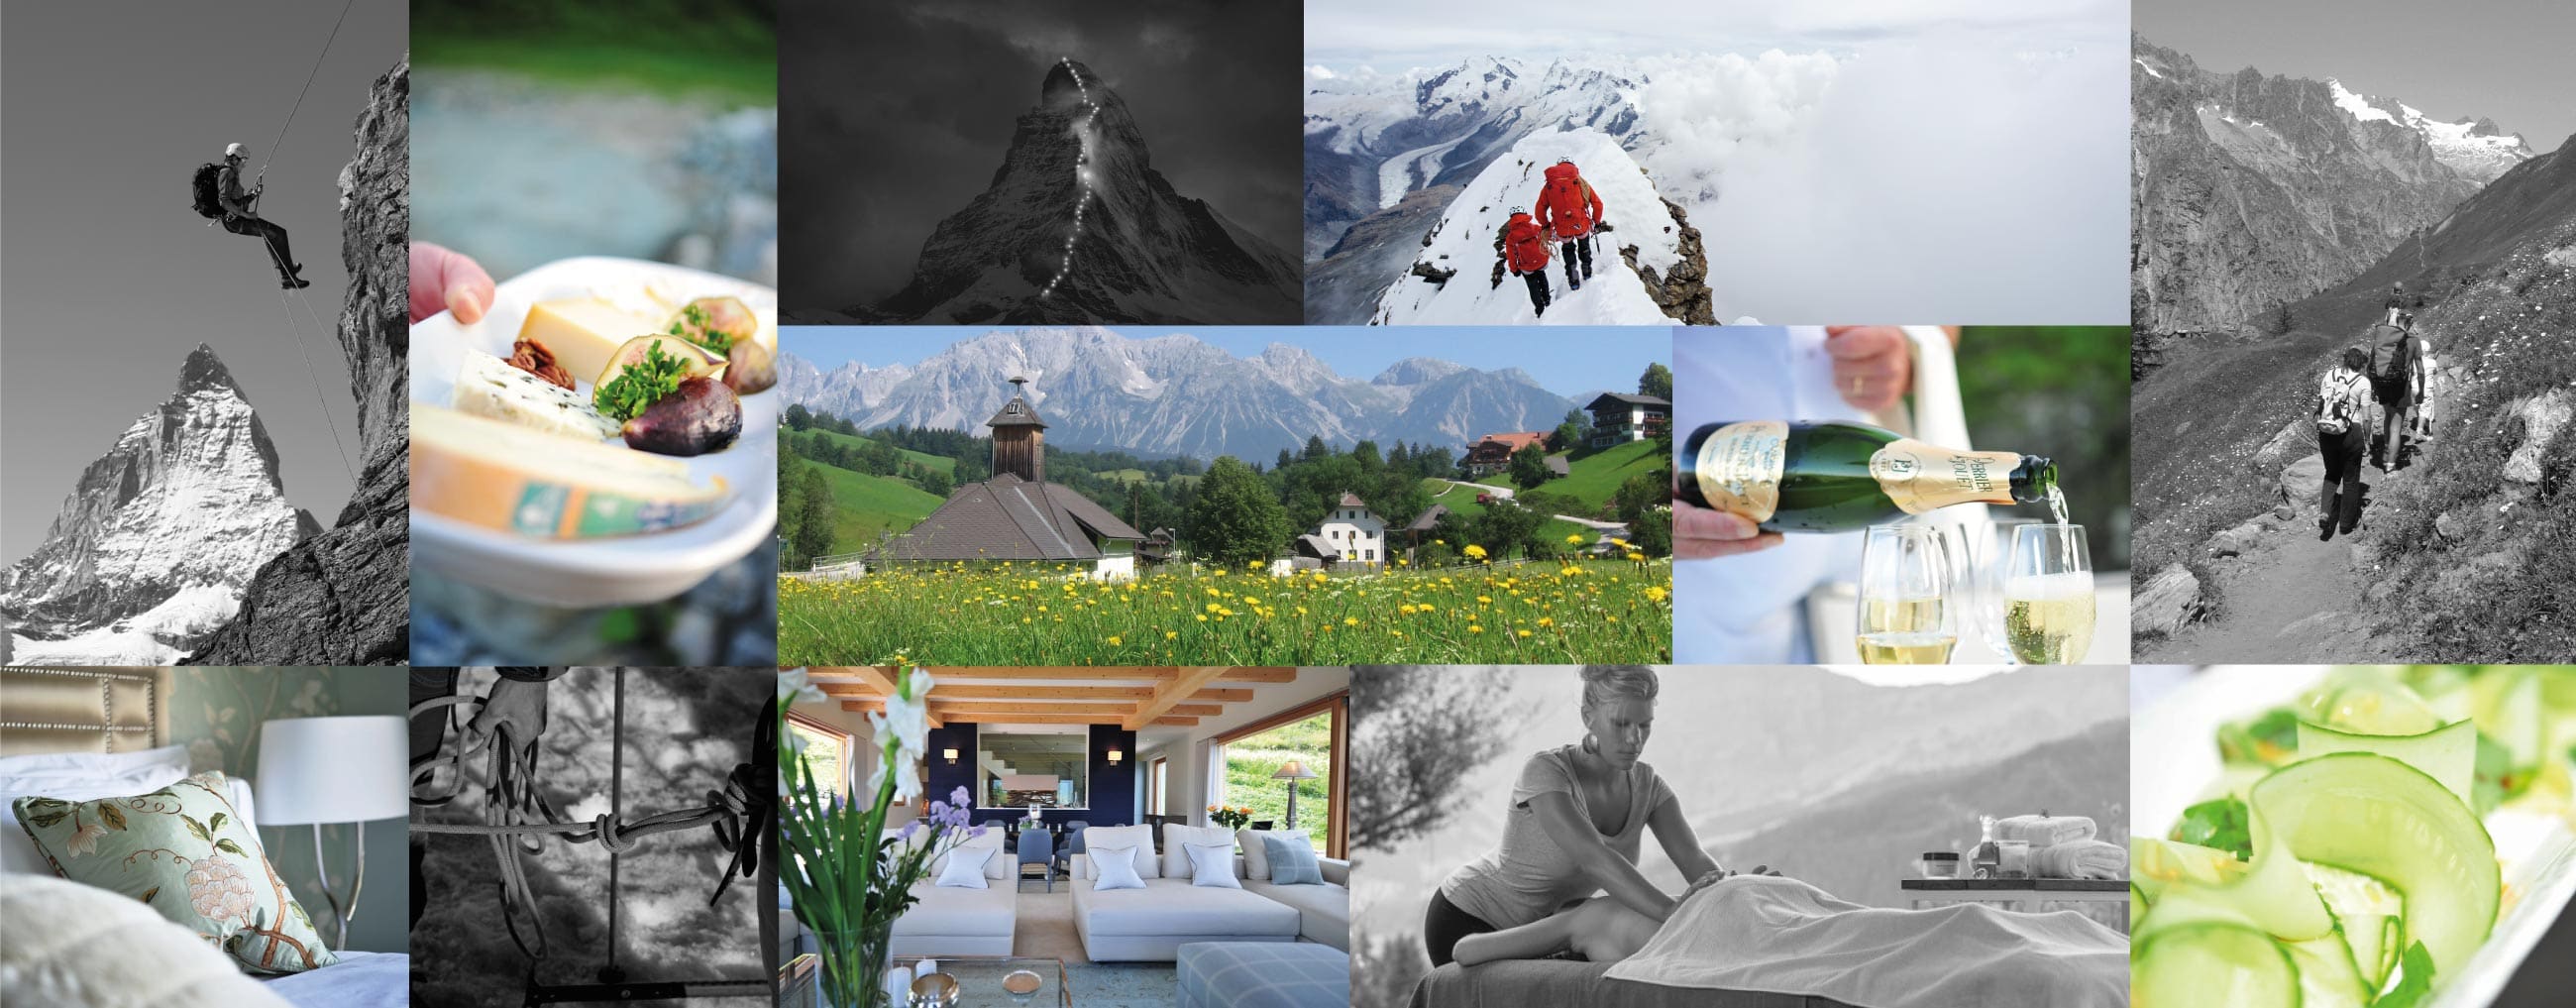 Guided-hiking-Vacations-in- The -Swiss-Alps-Swisskisafari